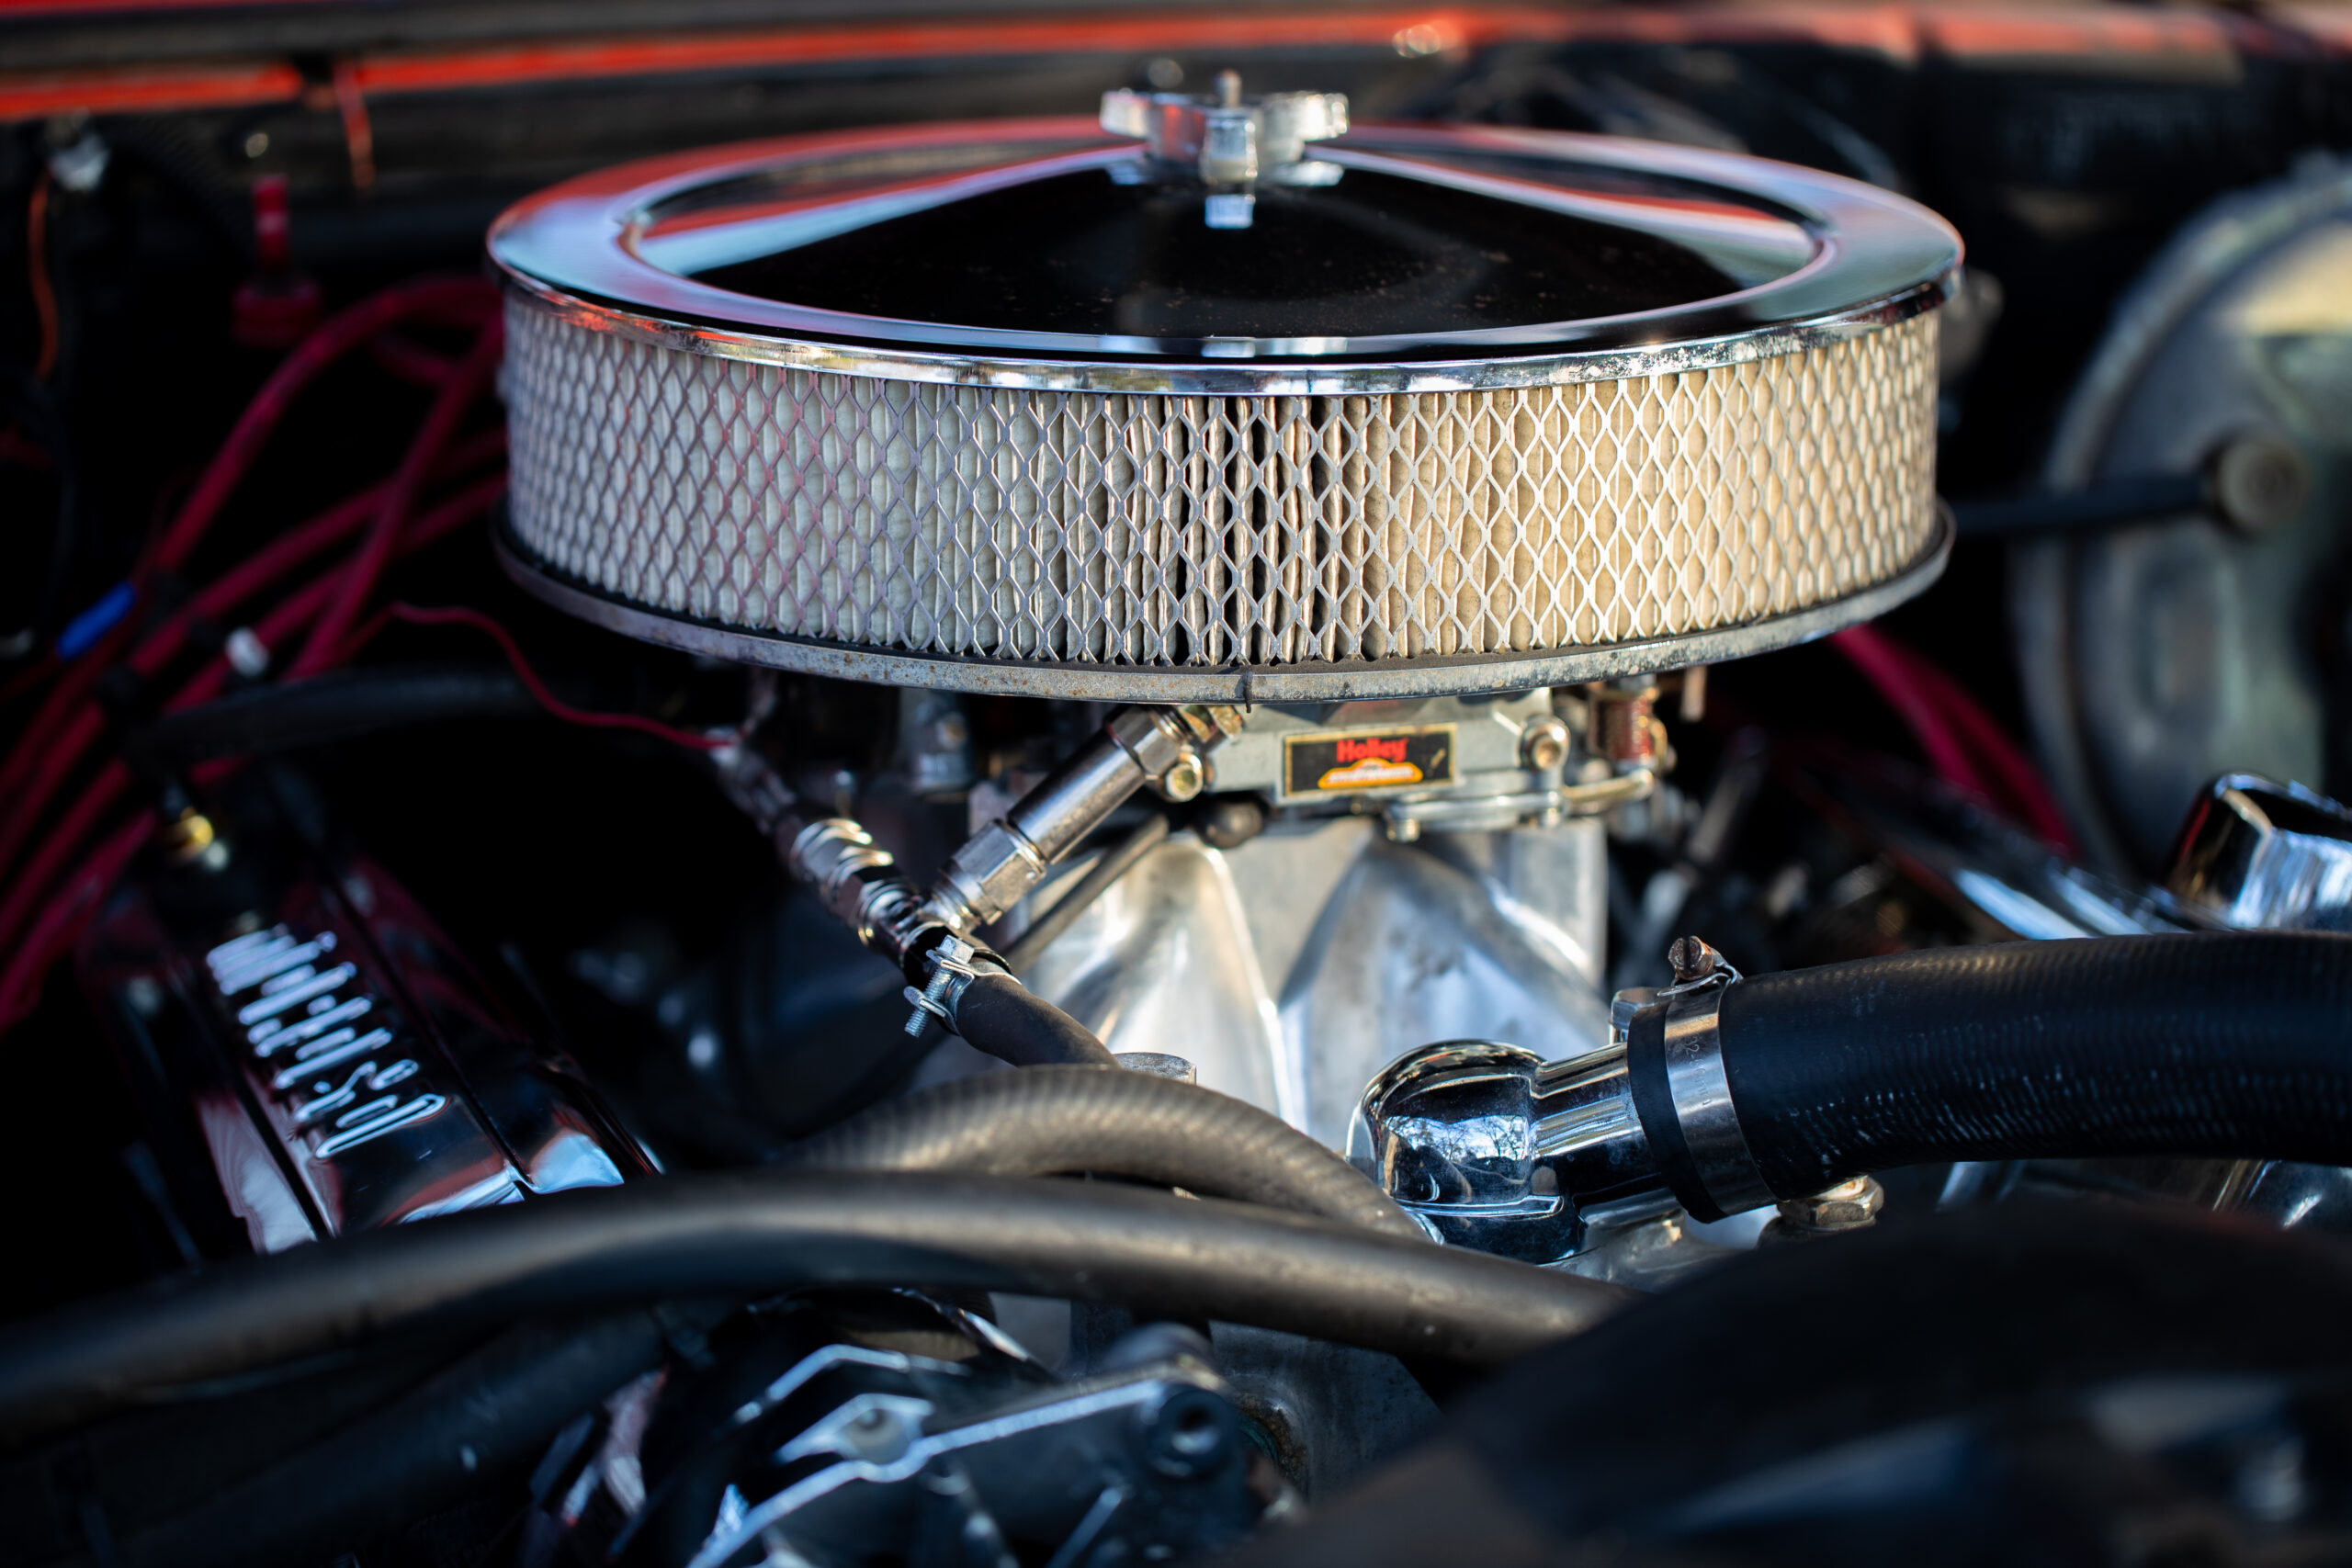 Close-up view of a car engine showing a round, chrome air filter with a mesh design mounted on top of the engine components. Various hoses and wires are visible around the engine.